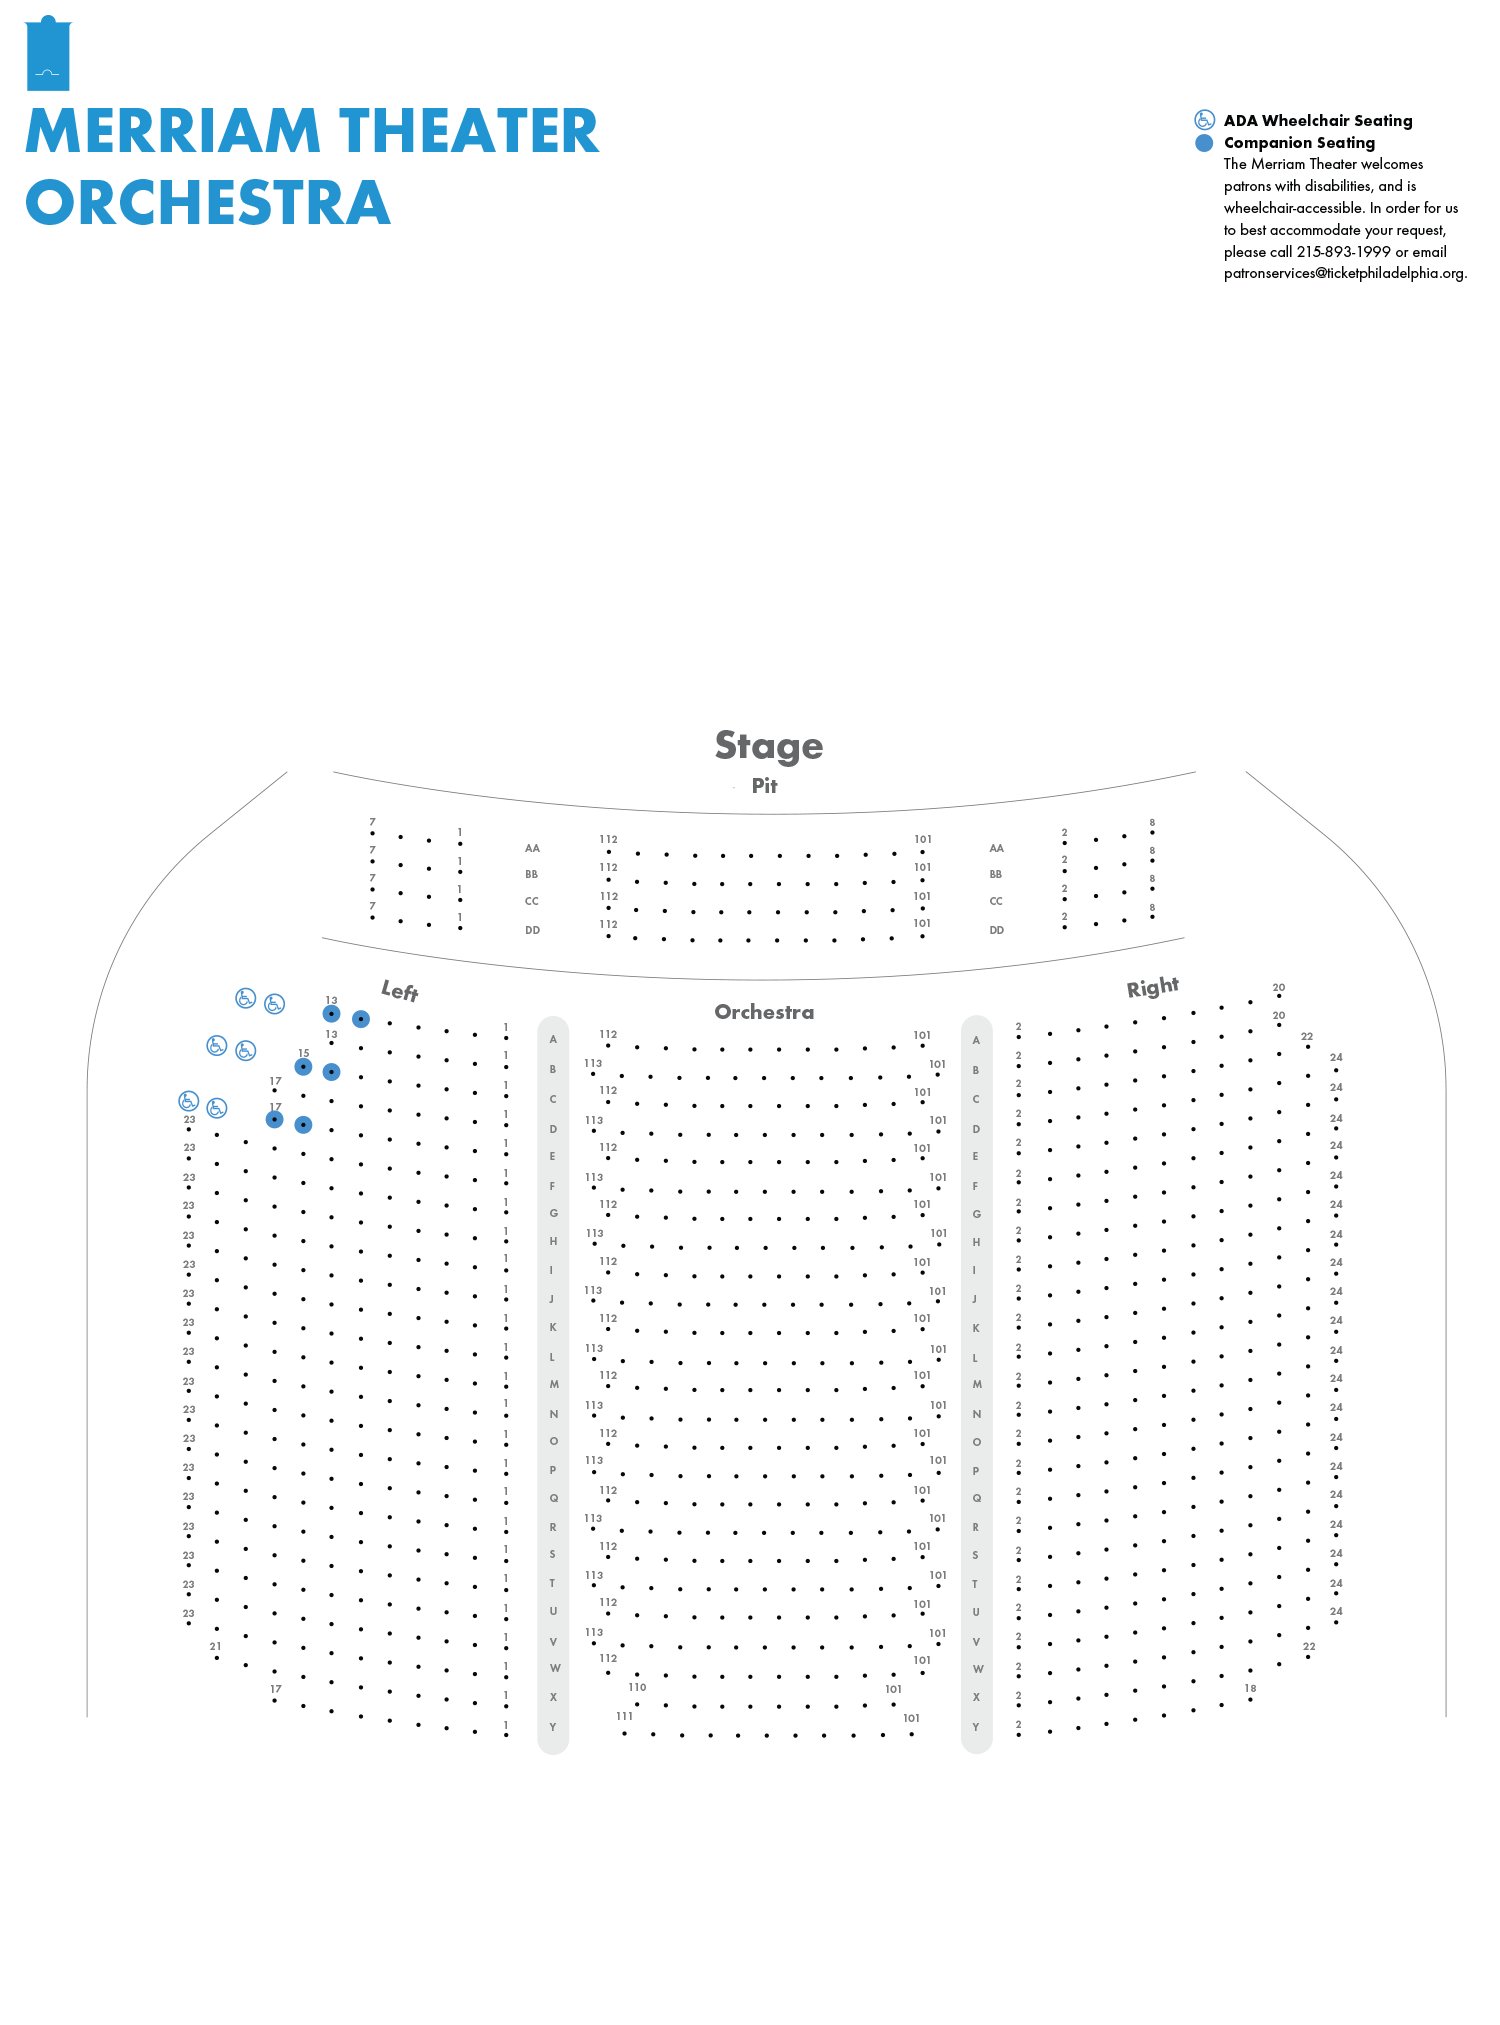 Merriam Theater Seating Charts - Kimmel Center